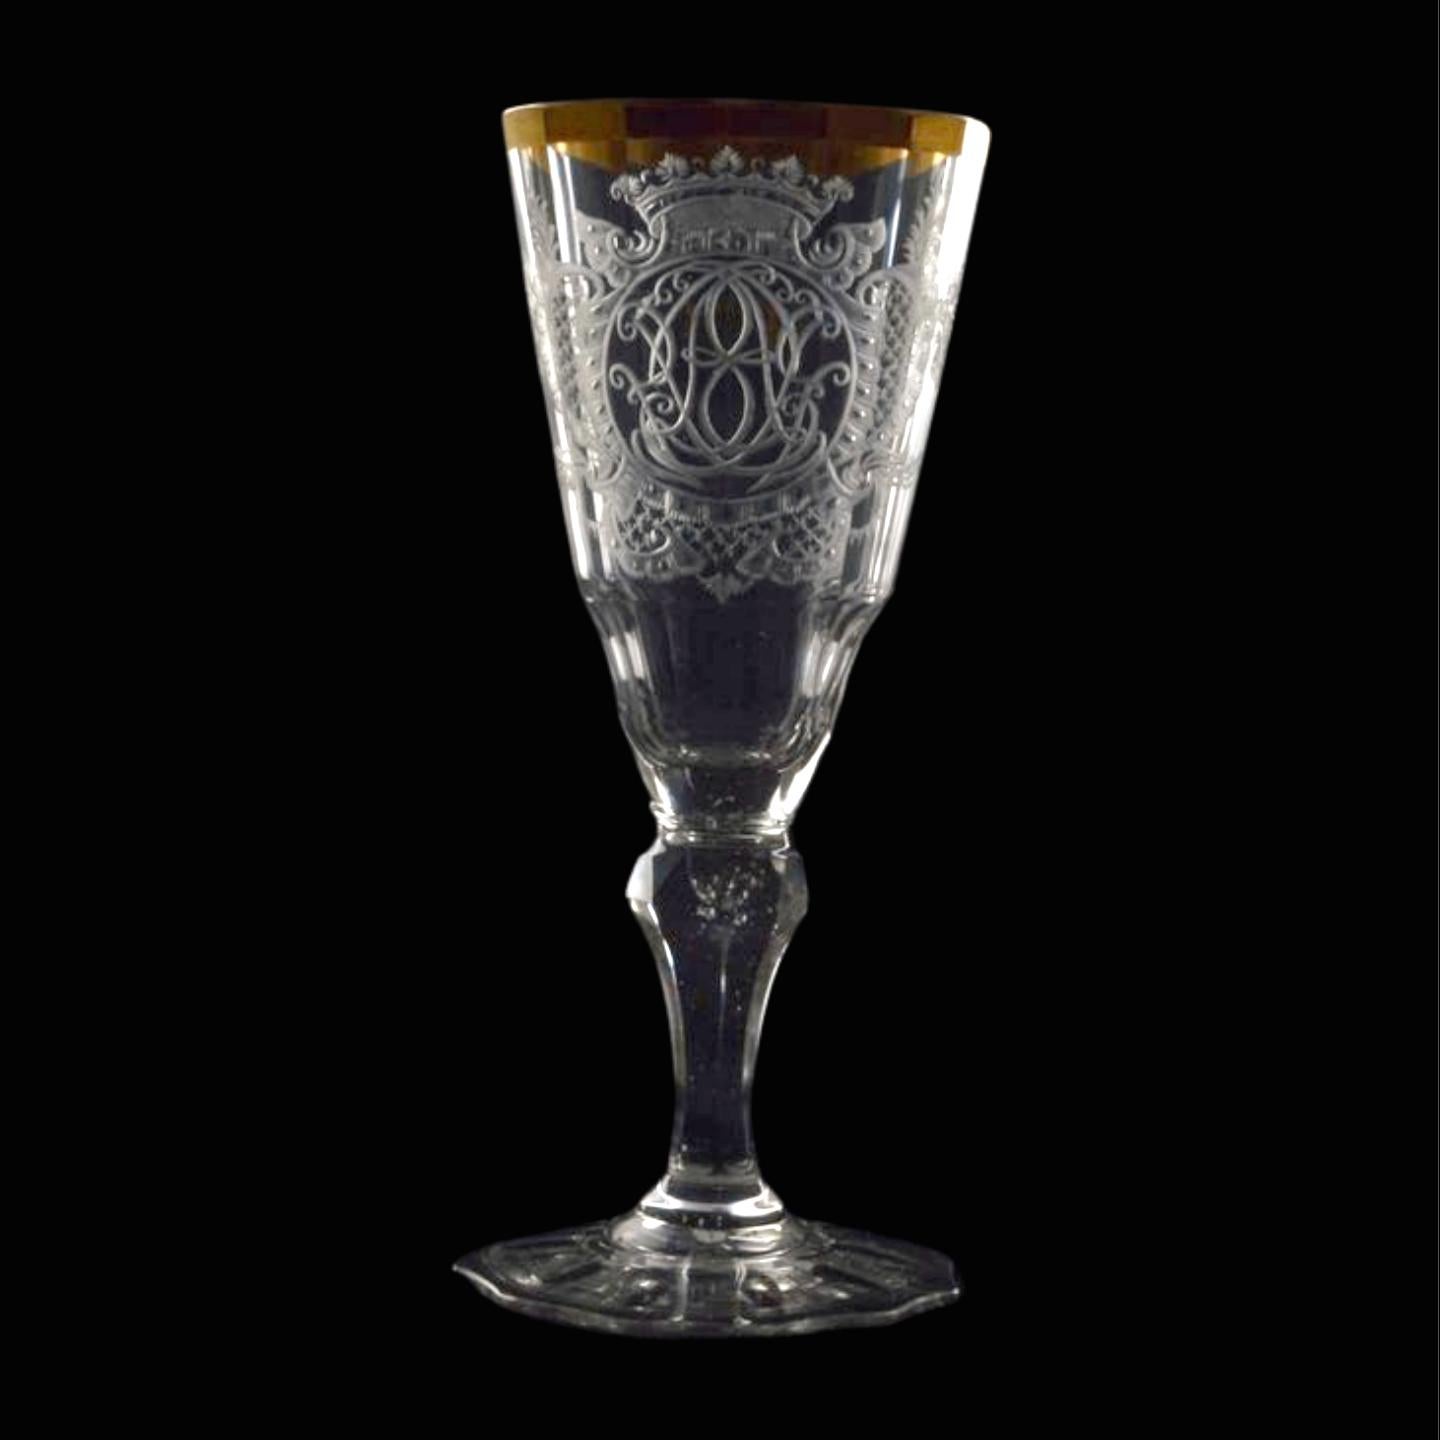 A gorgeous conical wine glass with elaborate engraving encompassing a monogram below a crown, and a gilt rim.


Warmbrunn glass, also known as Warmbrunner glass, refers to a type of glassware that originated in the Warmbrunn (now Cieplice